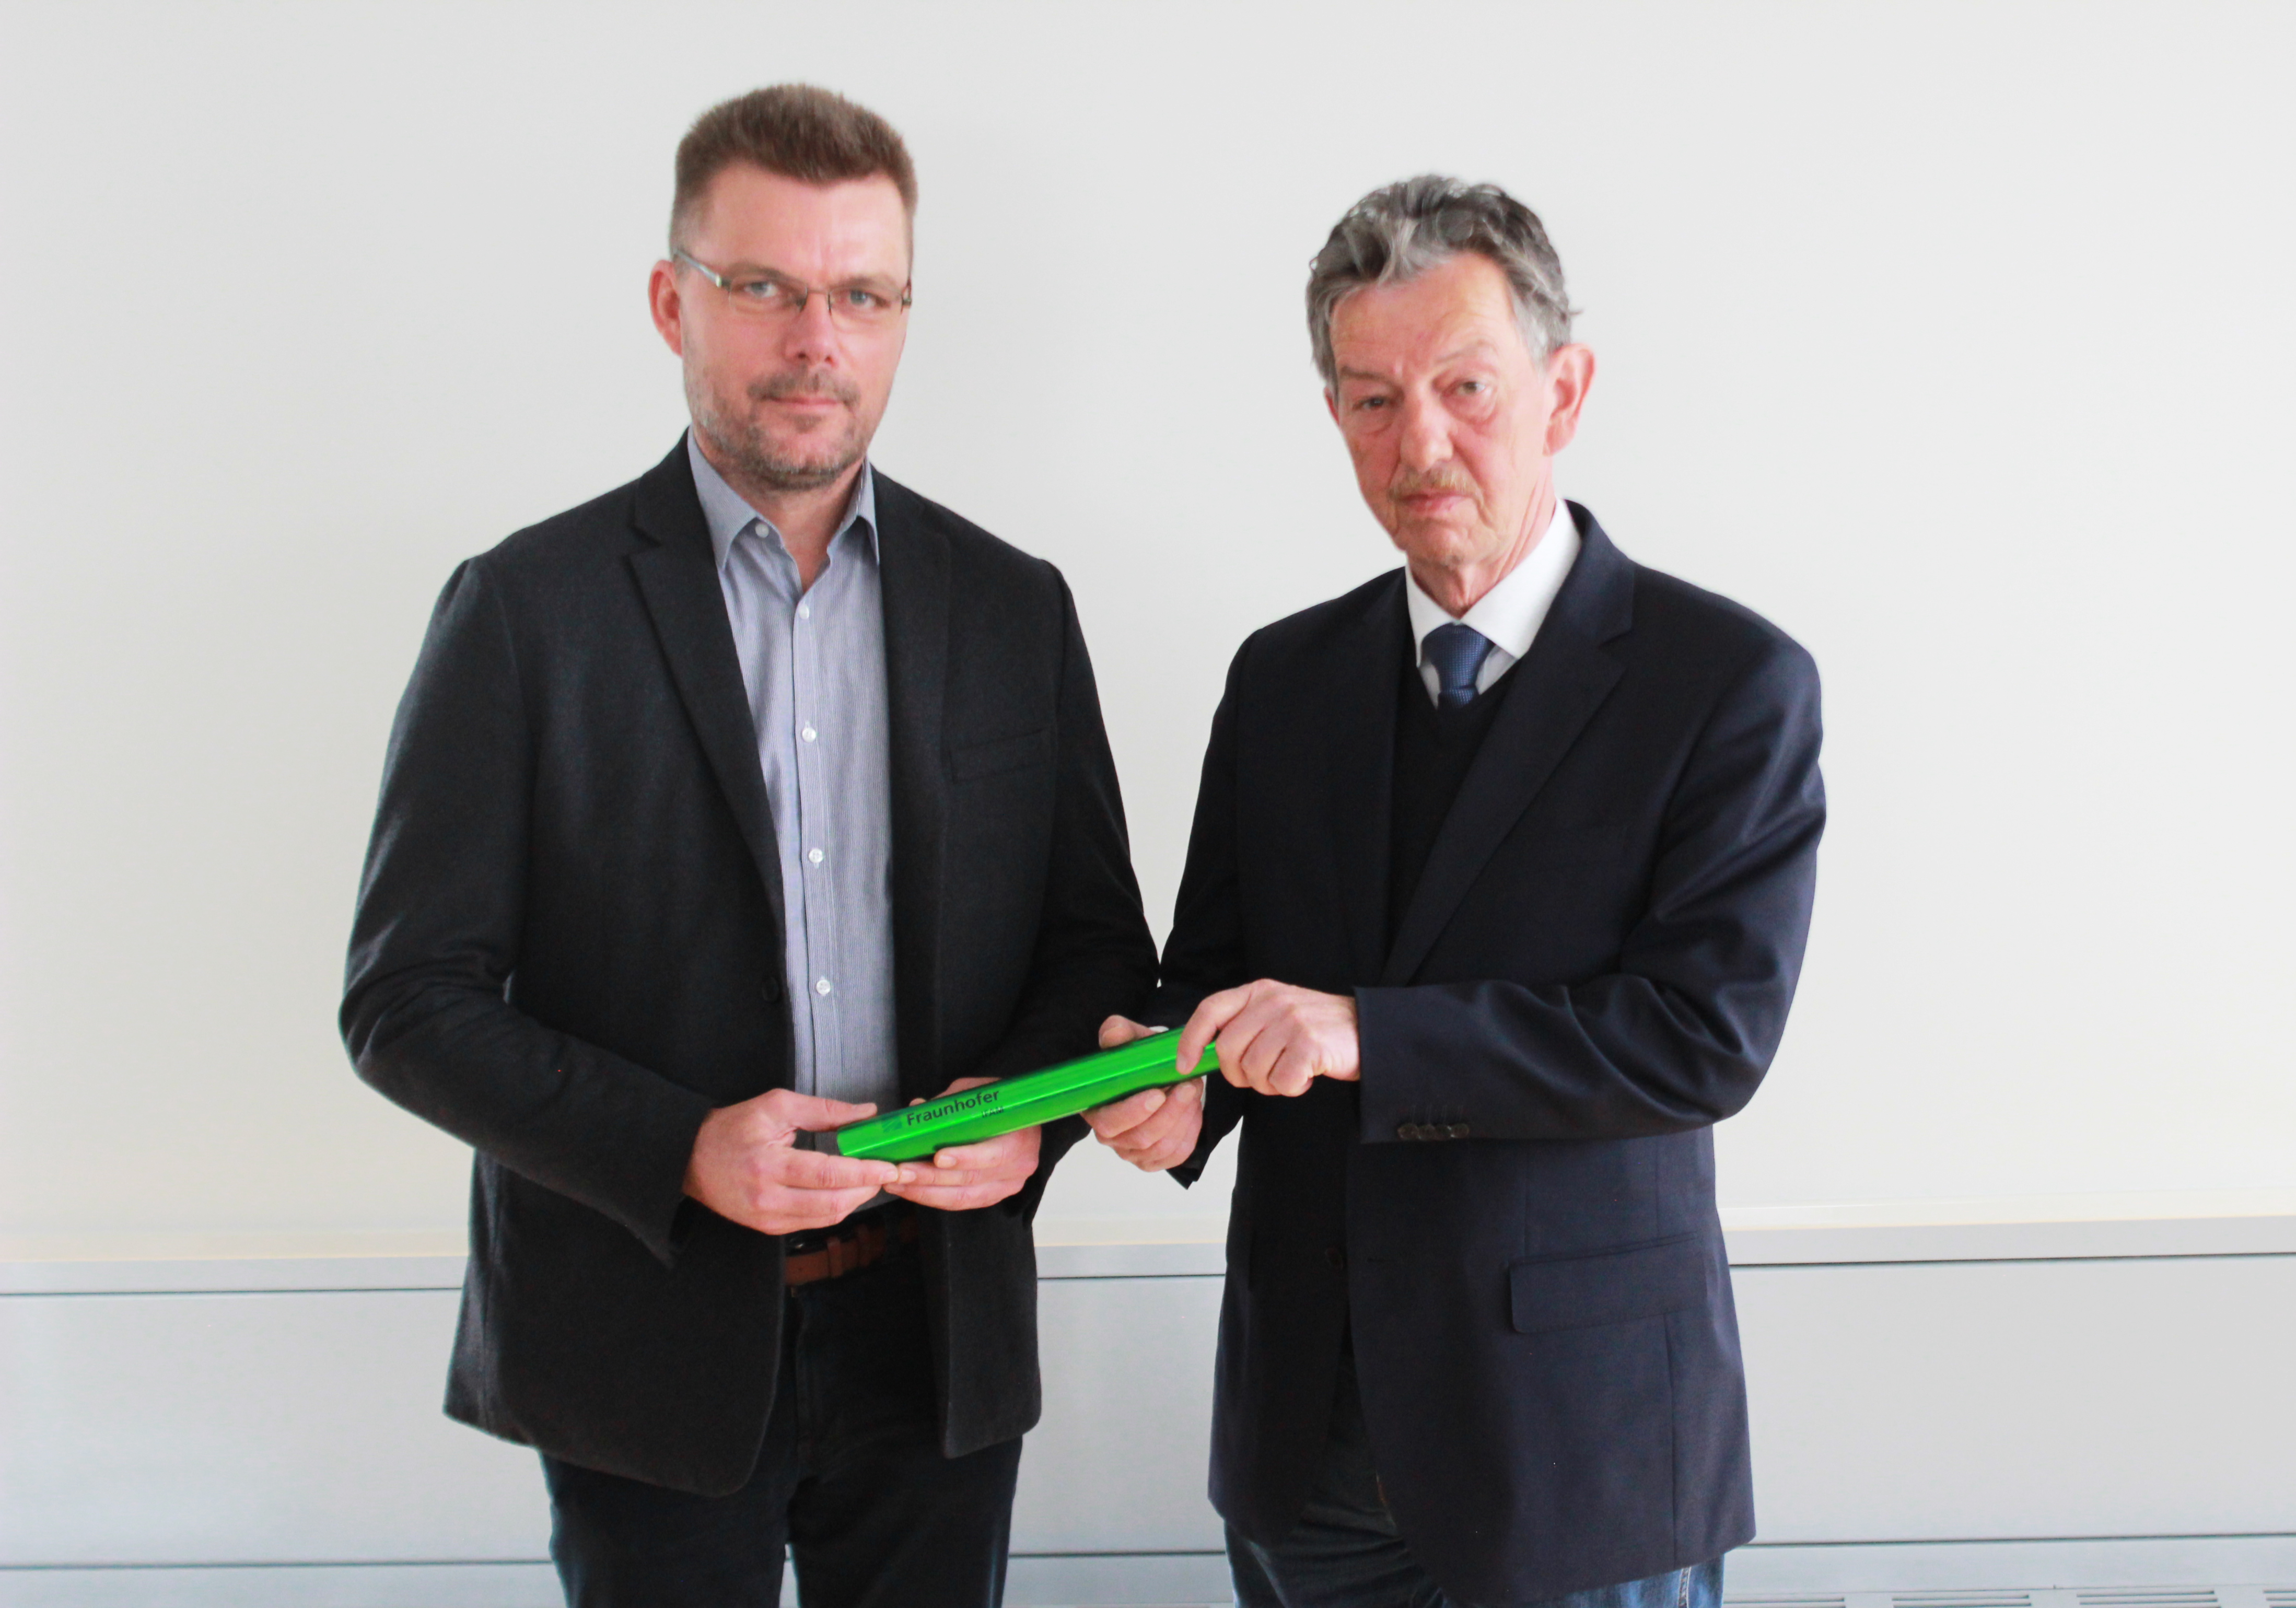 Dr. Thomas Weißgärber (left) takes over the baton for the management of Fraunhofer IFAM Dresden from his predecessor Prof. Bernd Kieback.